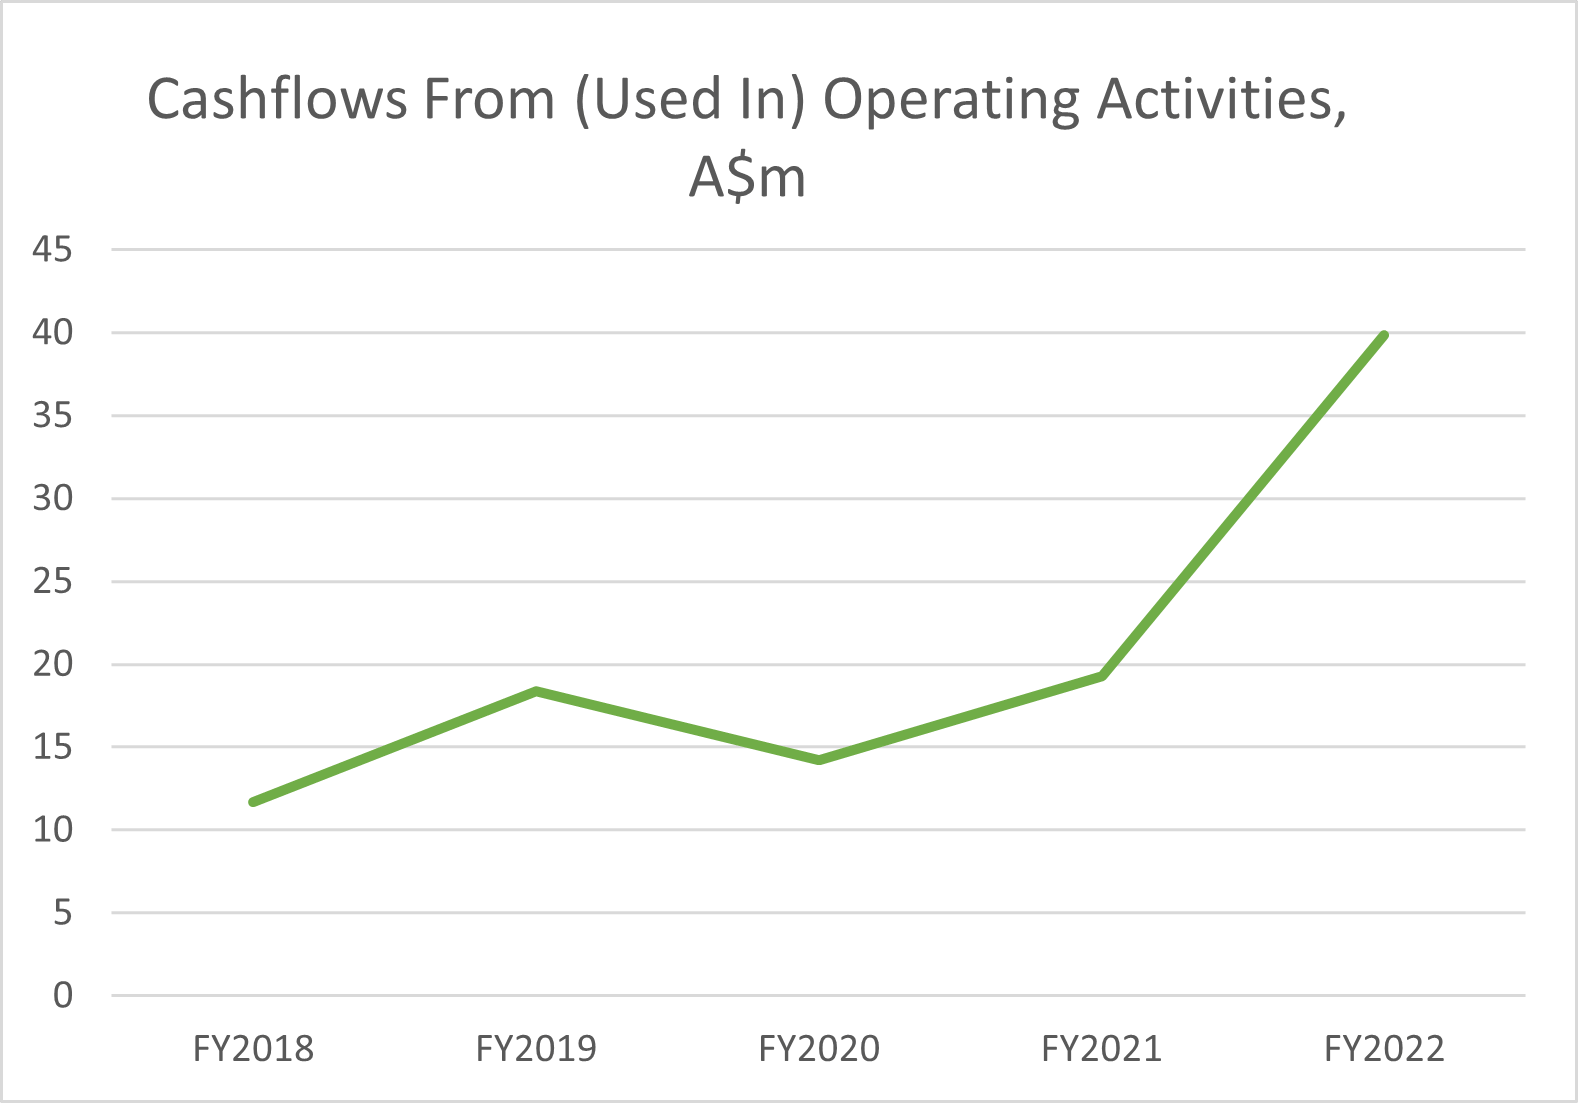 Graph 2022: Cashflows from Operating Activities